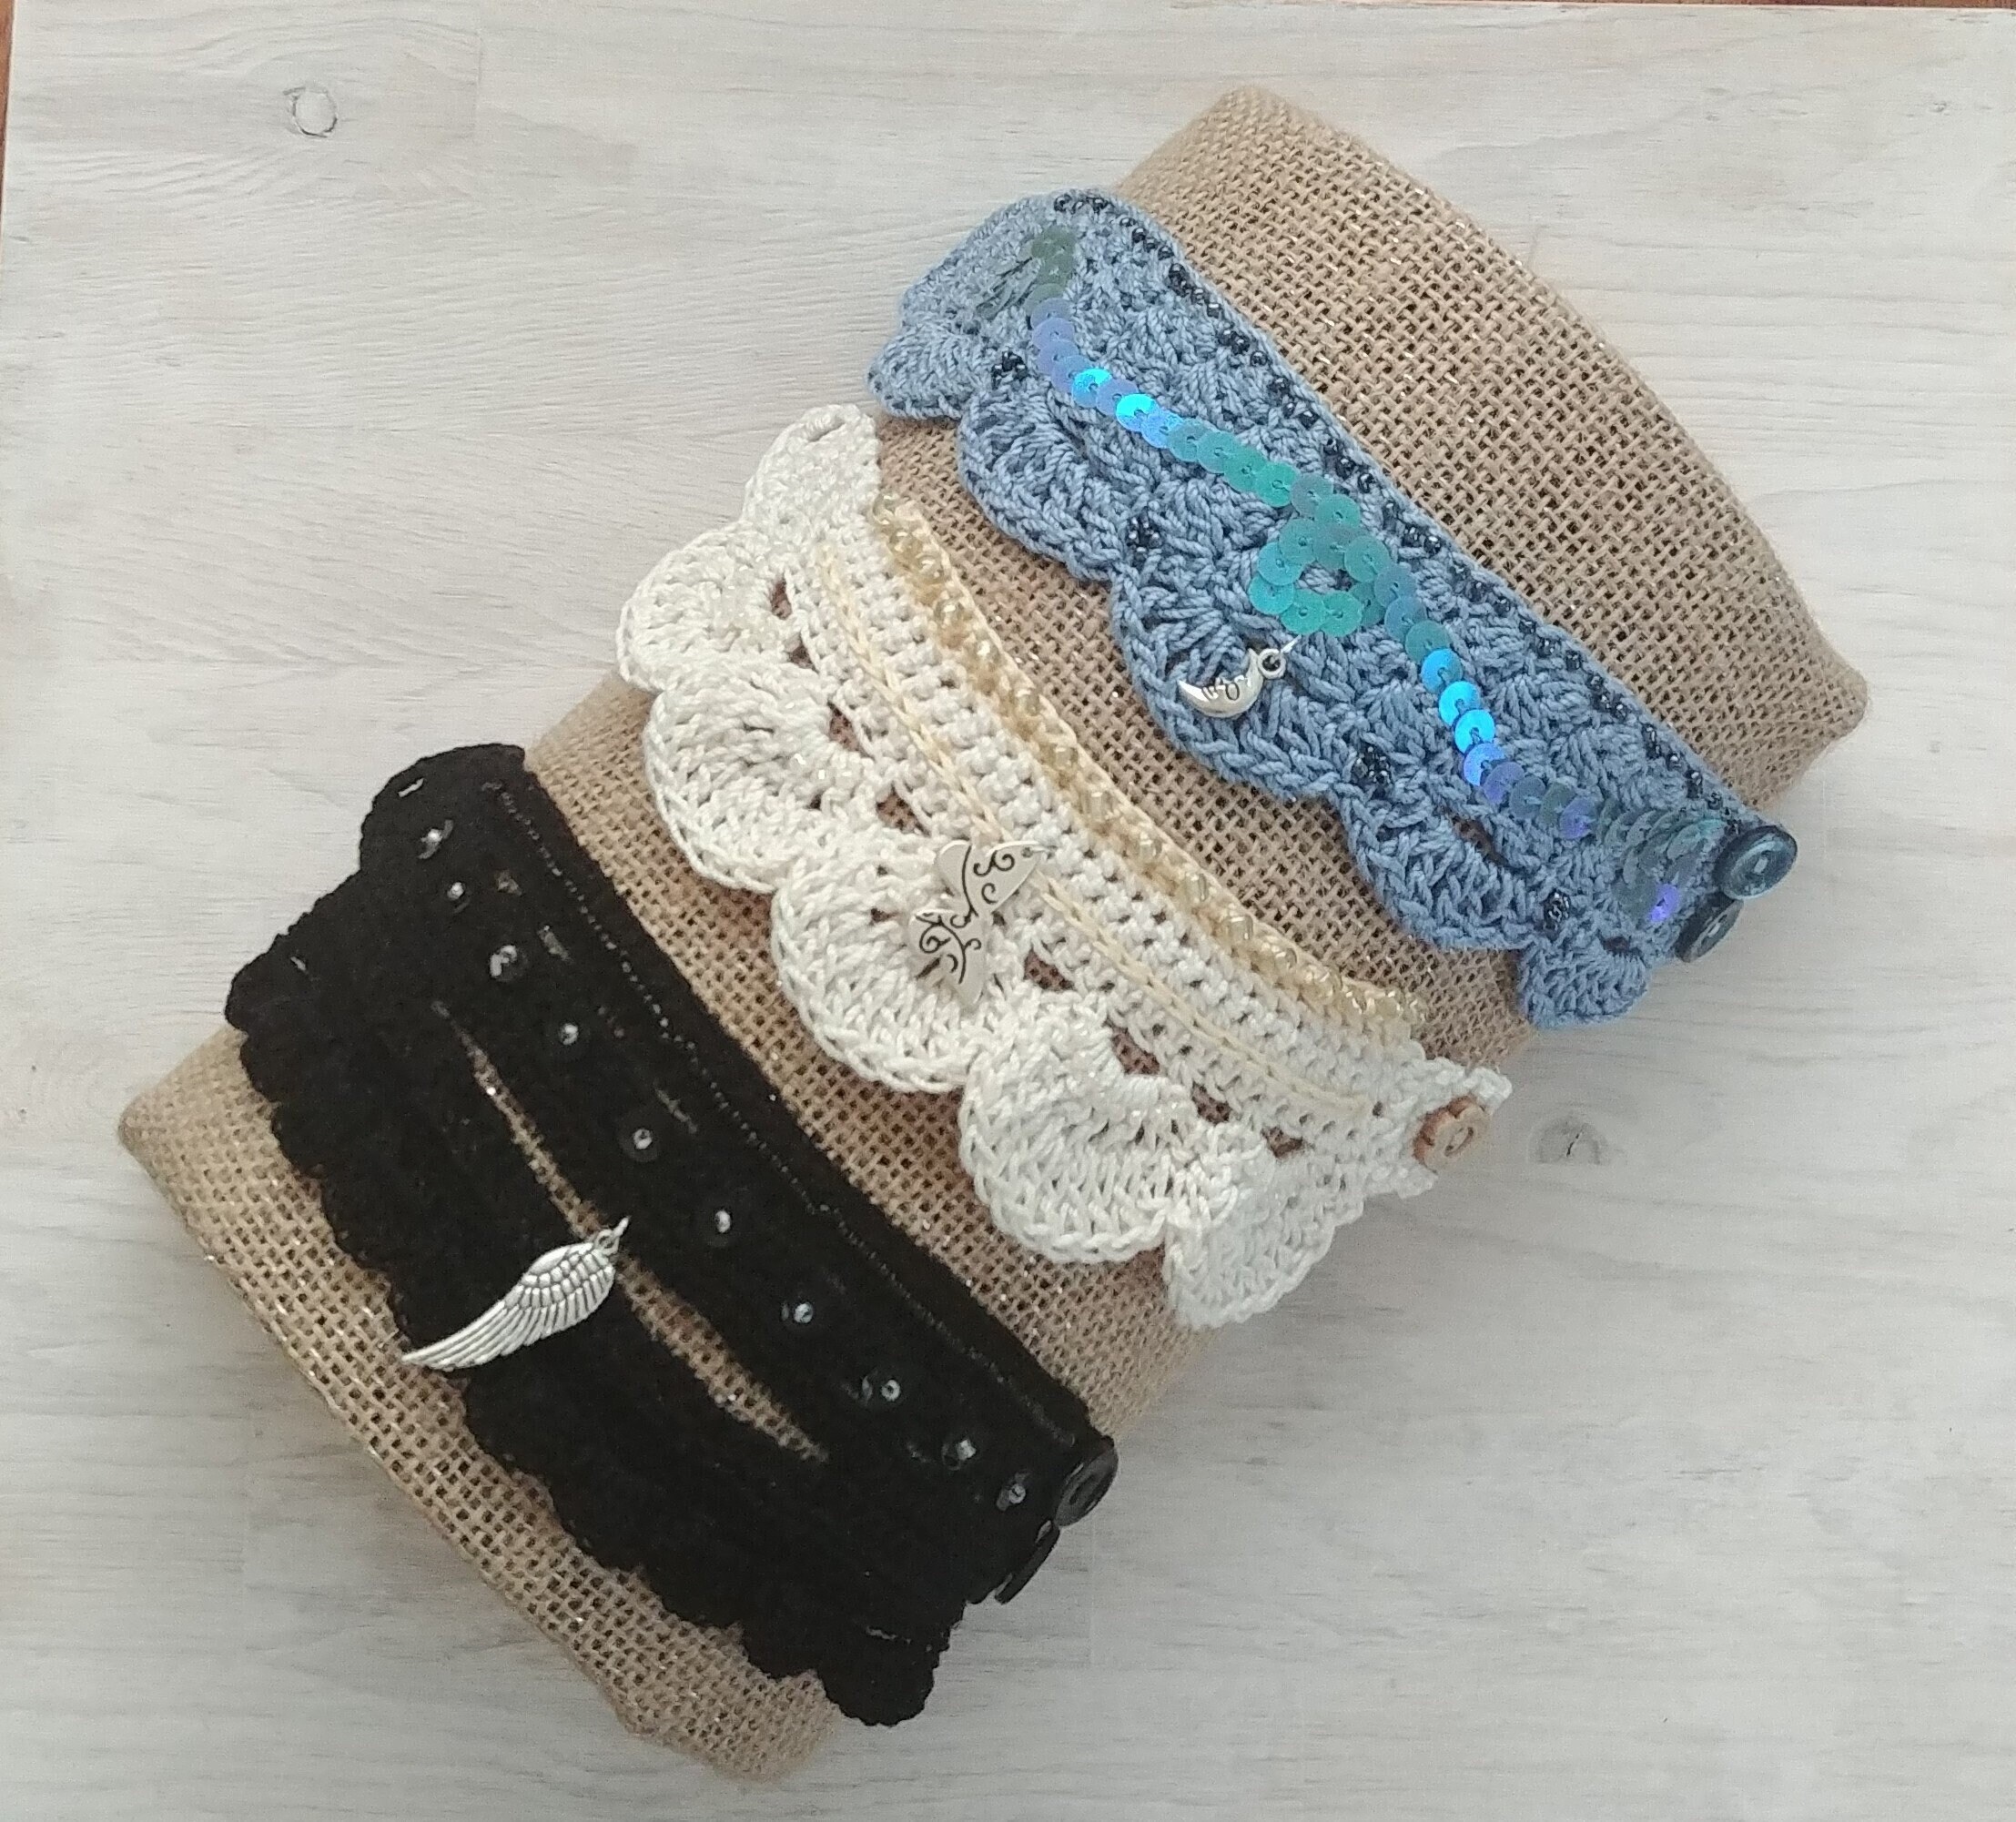 Irregular Expressions — beaded crochet bracelet with white and blue-gray...